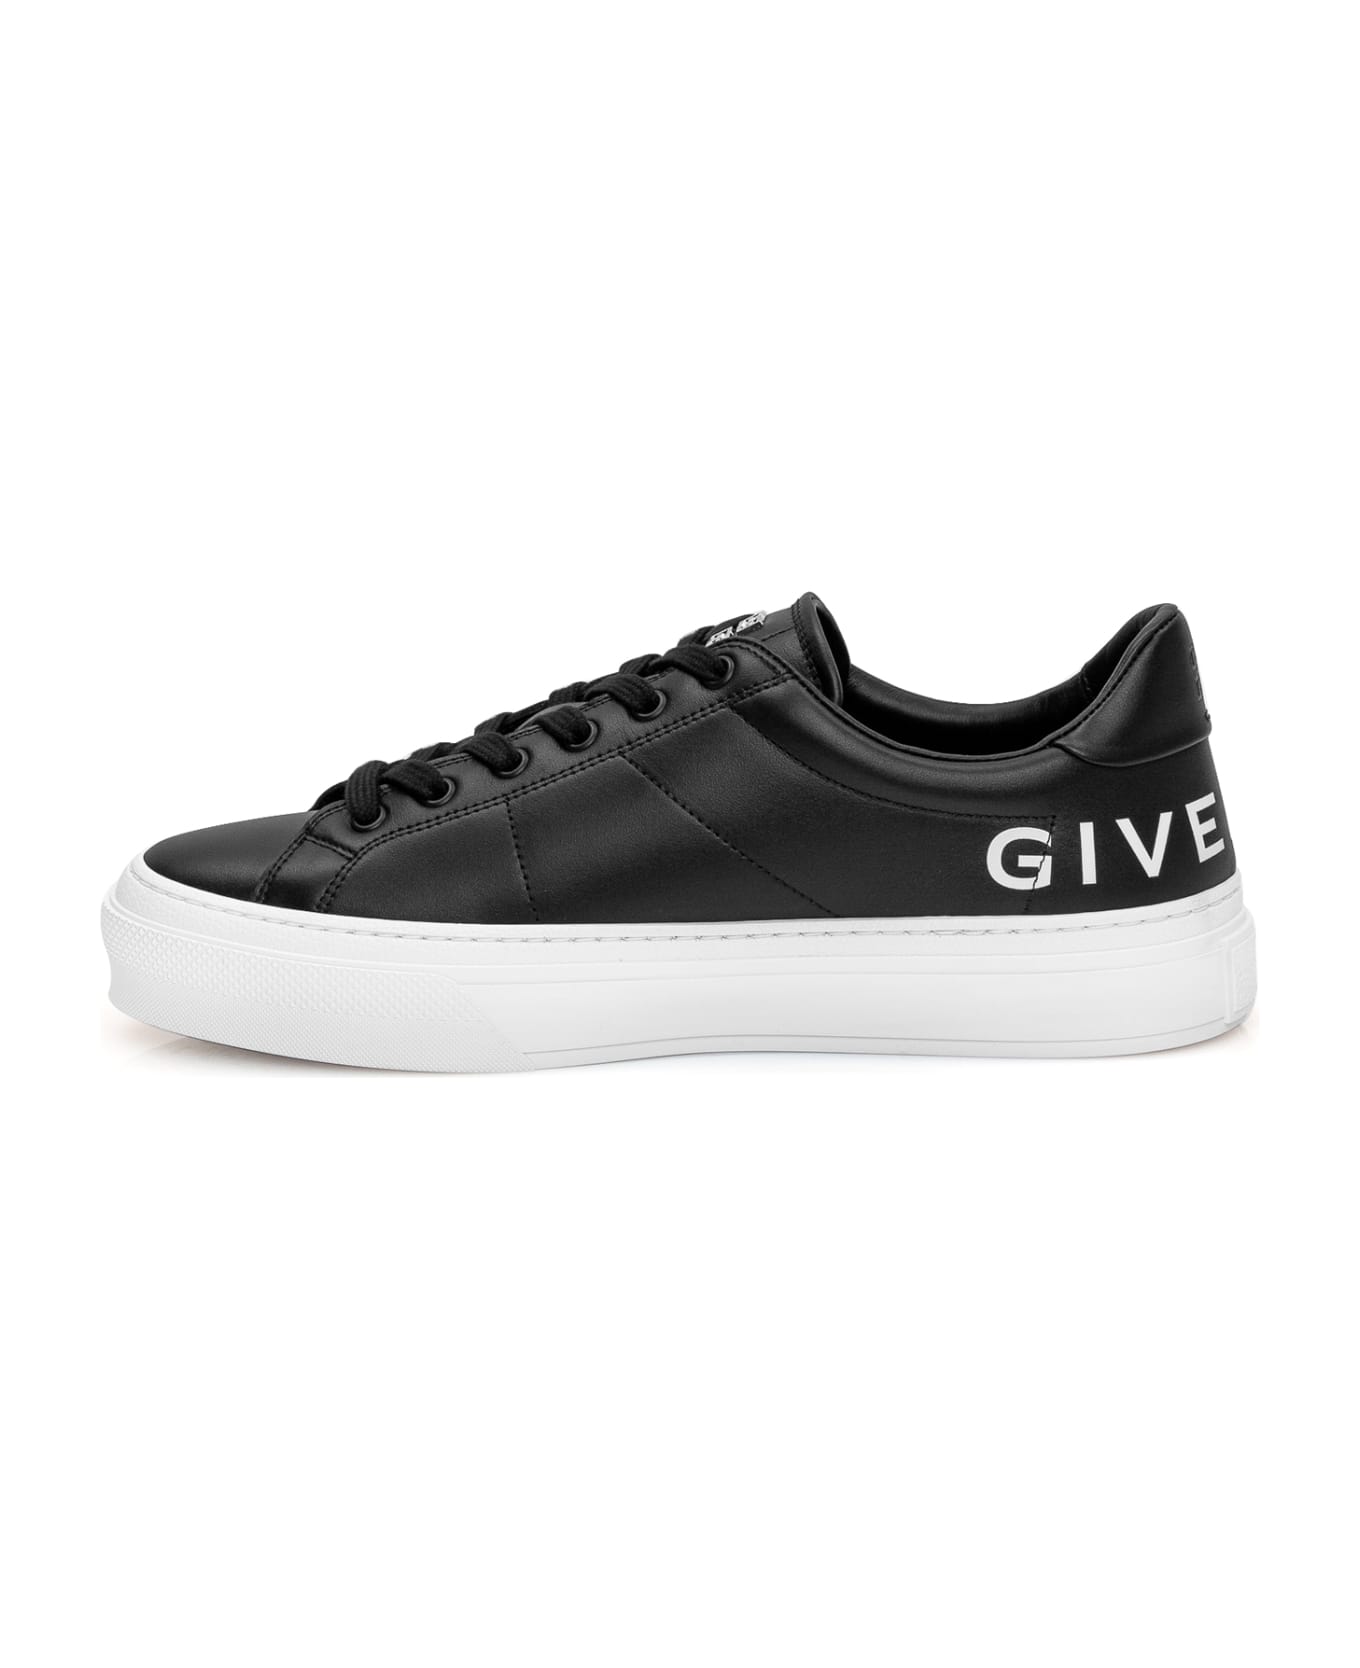 Givenchy Black City Sport Sneakers With Printed Logo - Black/white スニーカー